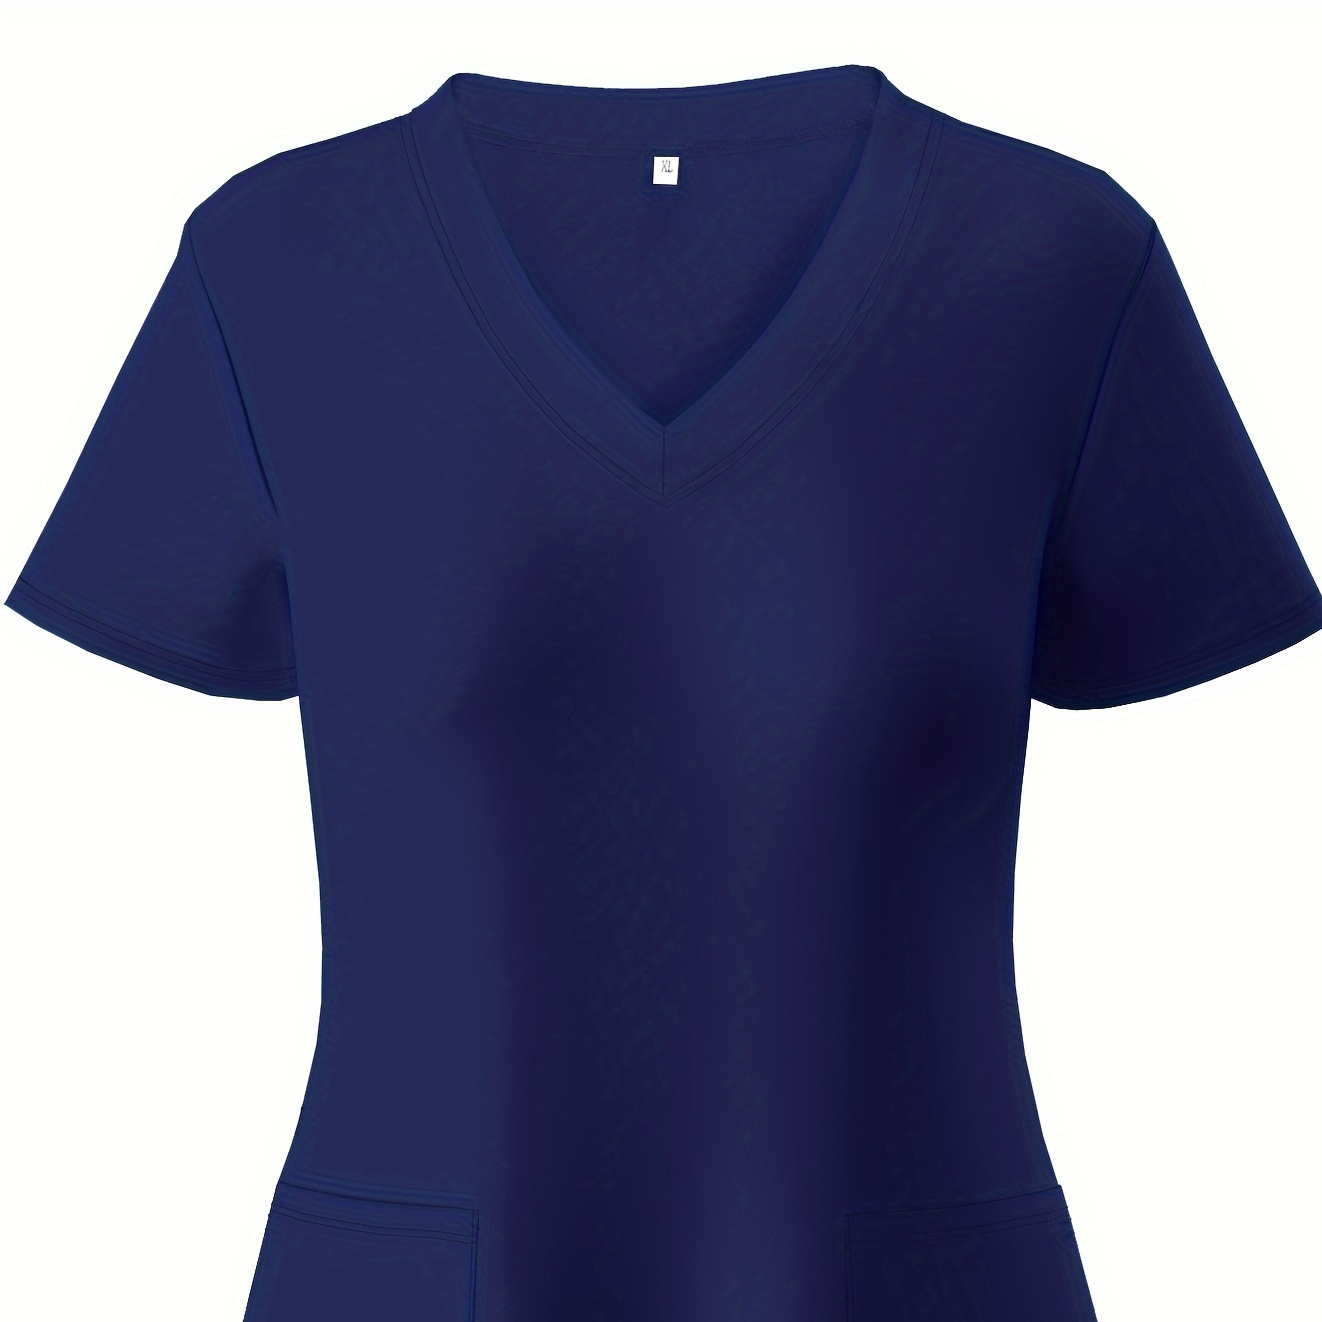 

Plus Size Solid Color Stretchy Dual Pockets V-neck Top, Comfortable & Functional Health Care Short Sleeve Uniform For Nurse, Women's Plus Size Clothing